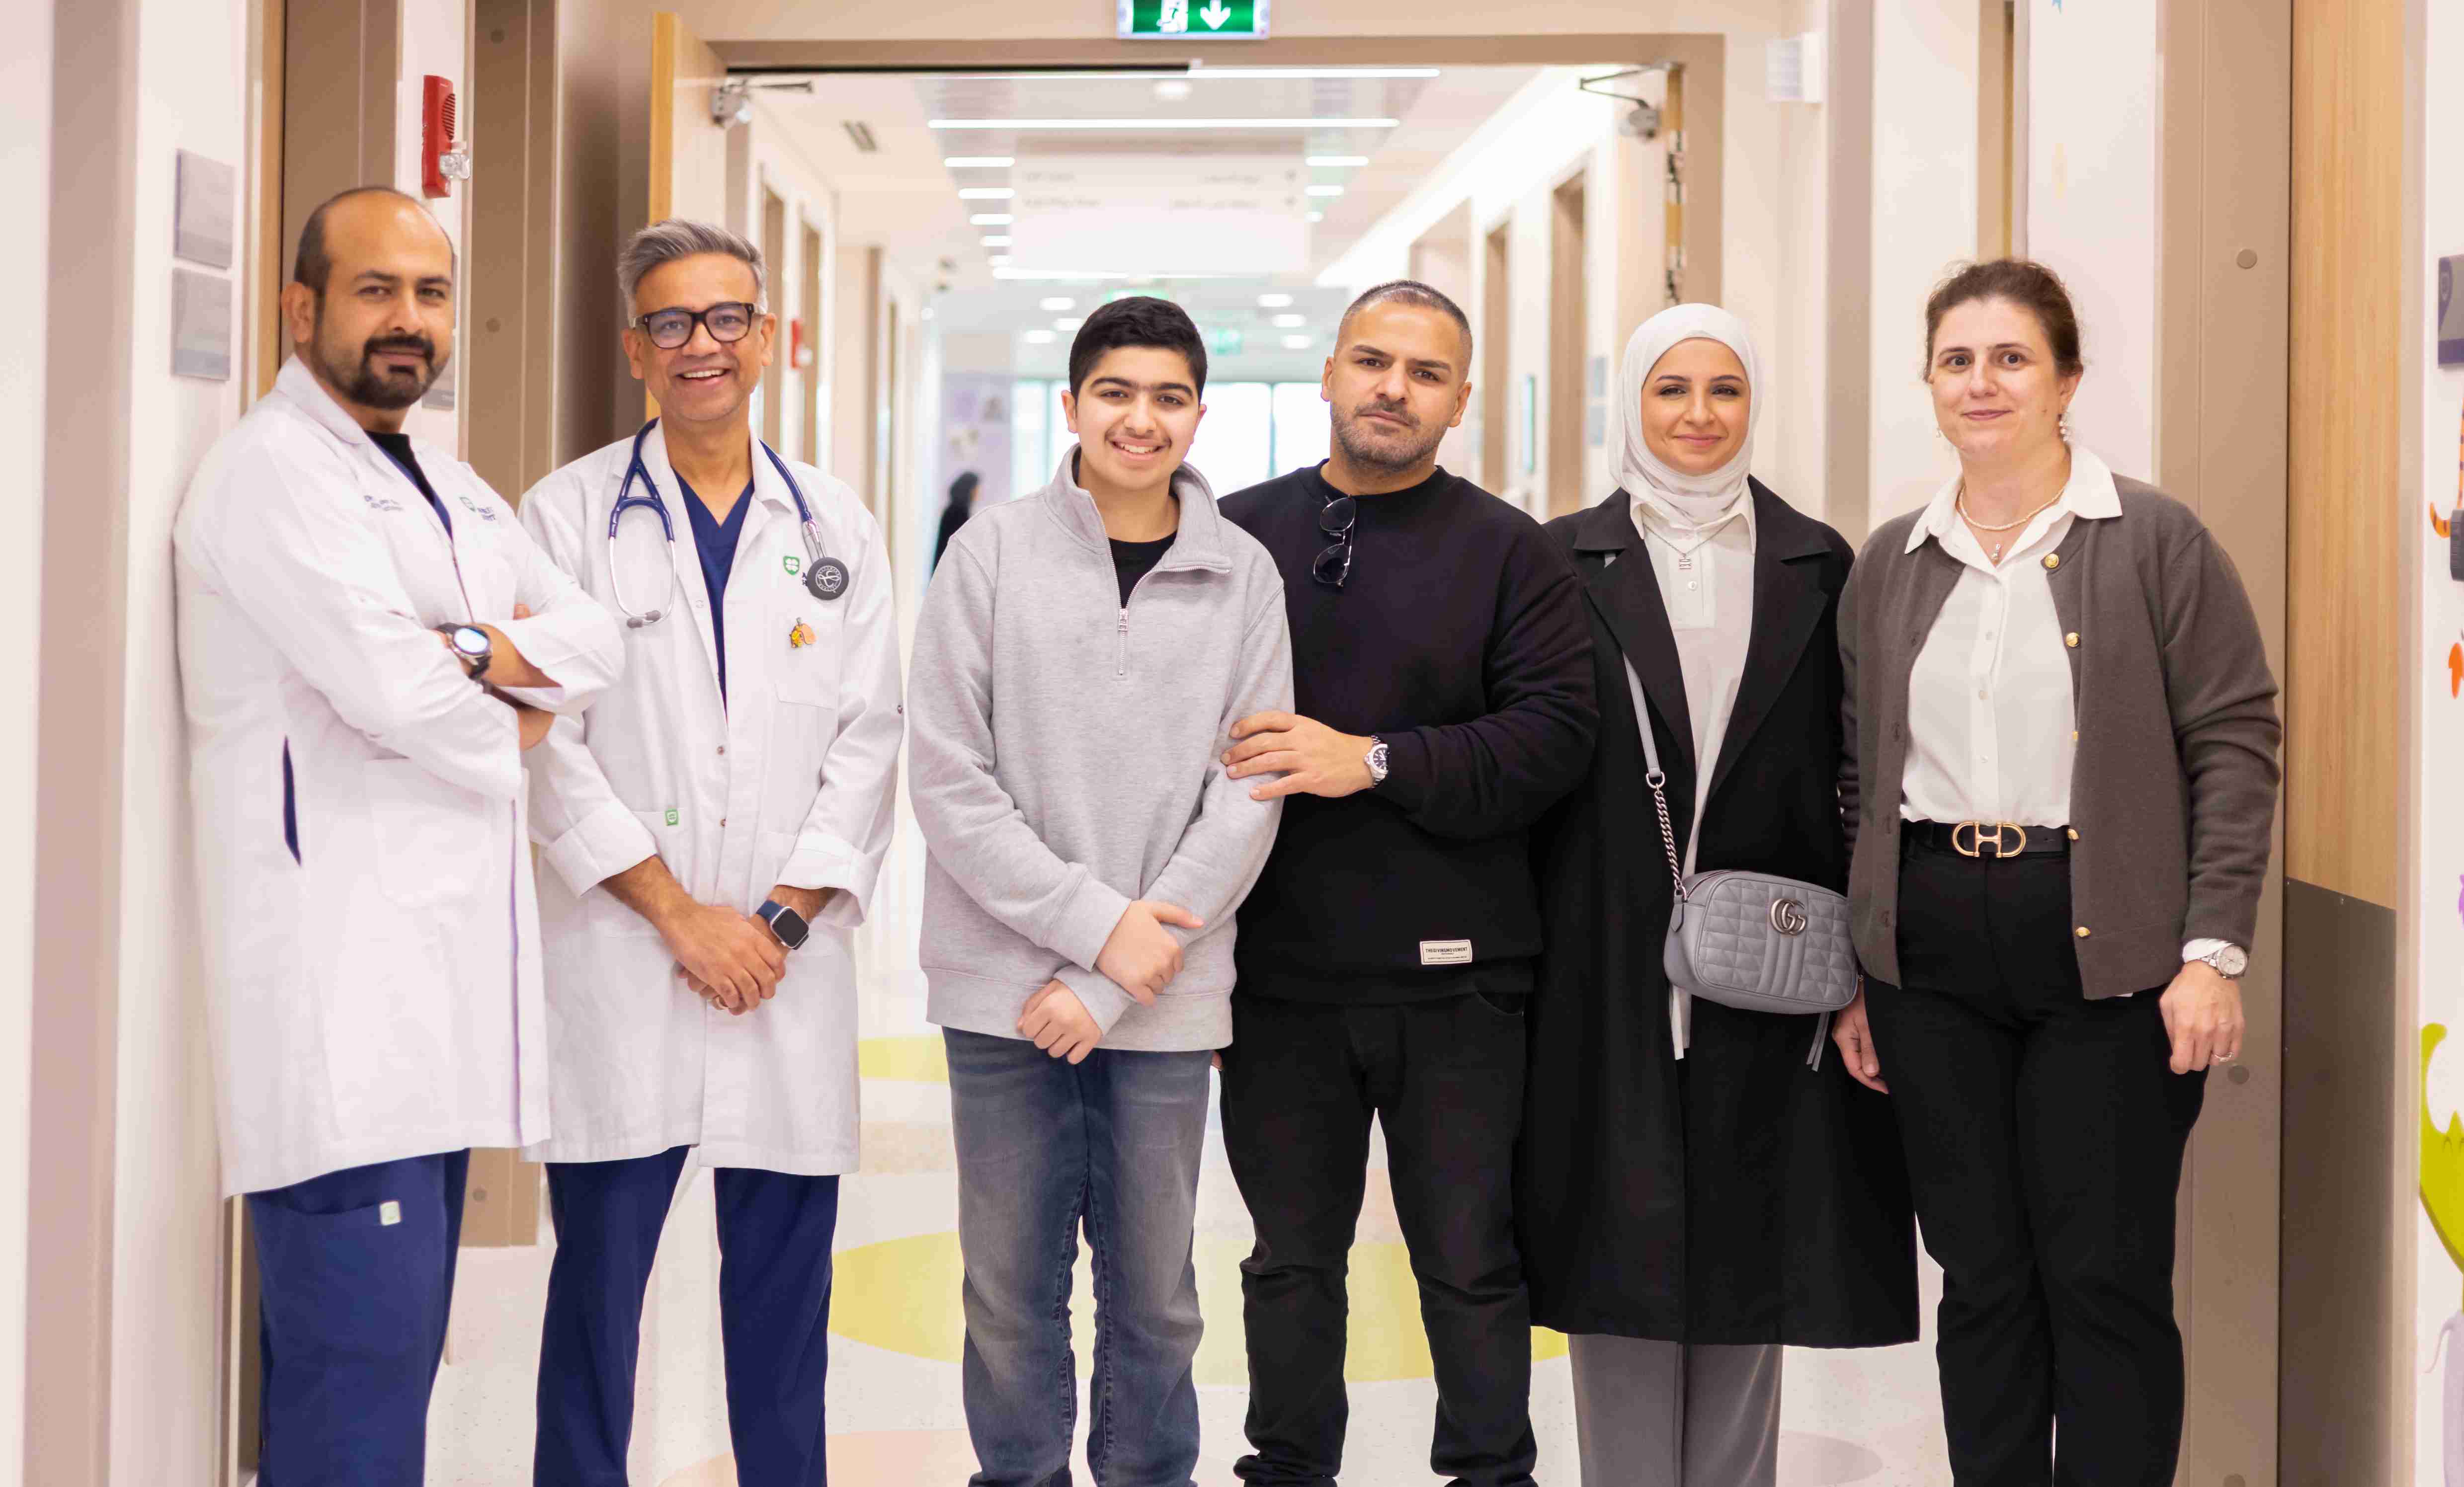 The right expertise and multi- disciplinary care at American Hospital Dubai helped a young Kuwaiti boy's life return to normal.